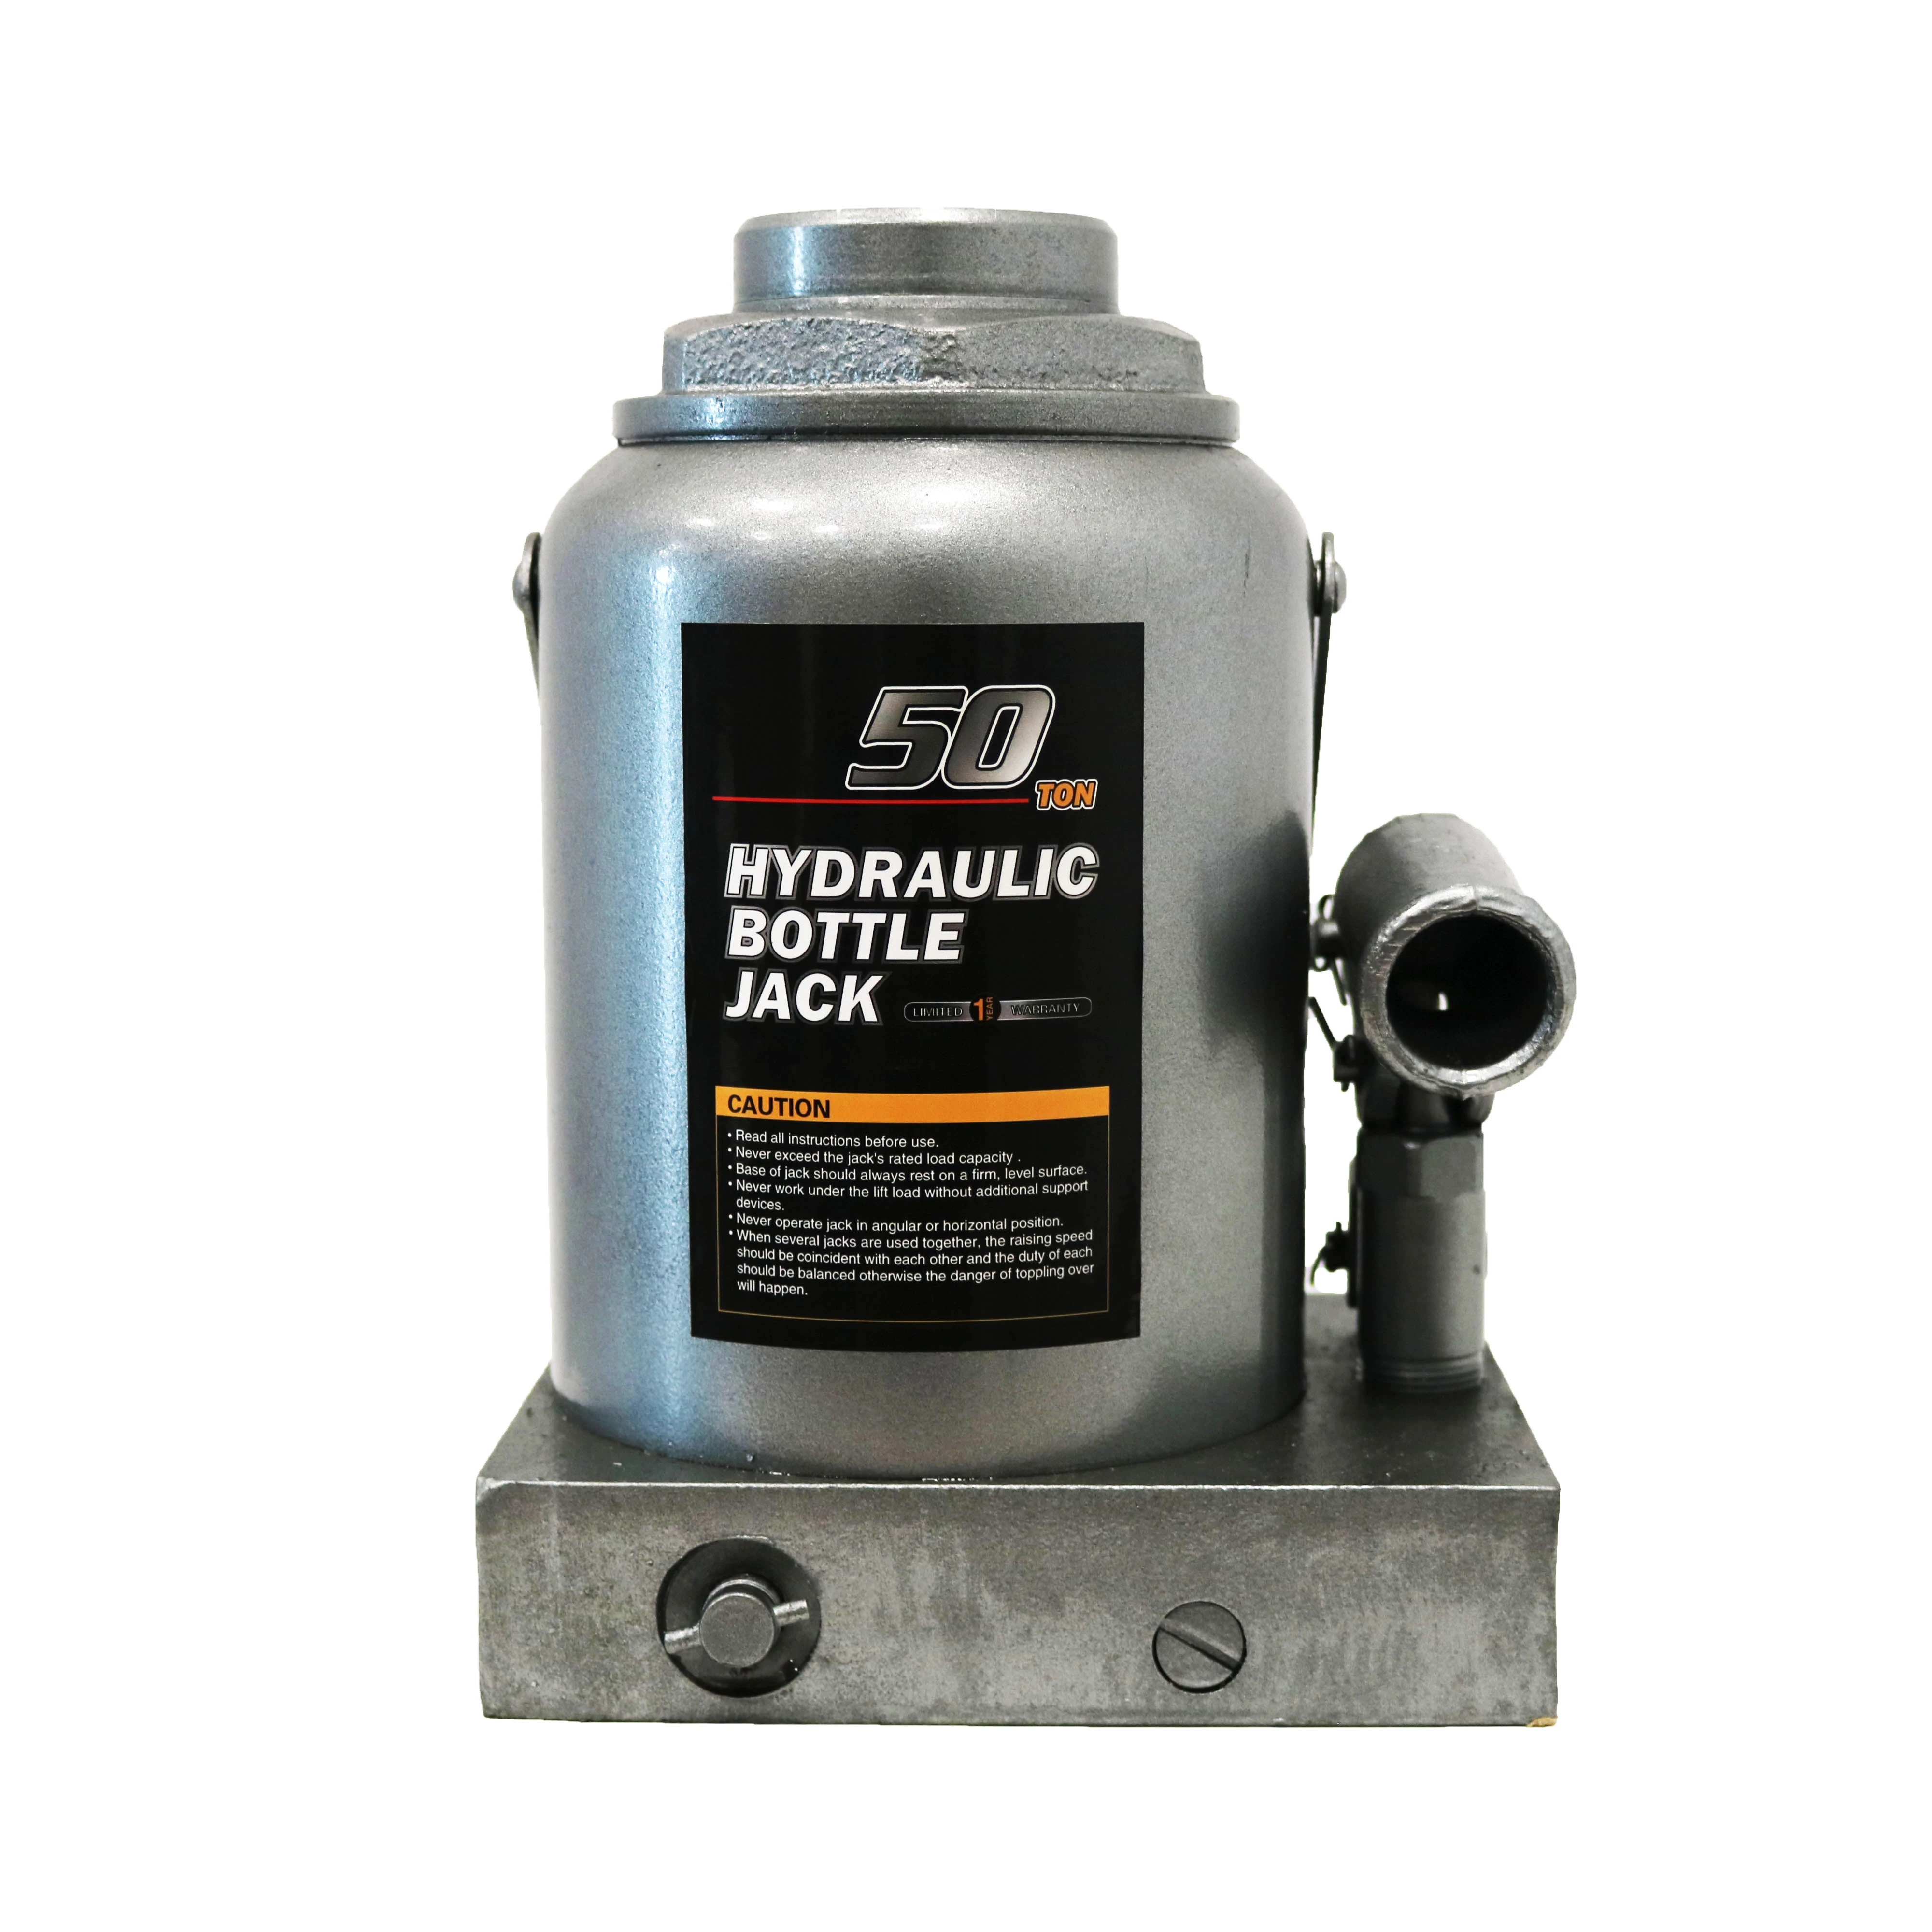 High quality mechanical 50t hydraulic bottle jack with safety valve